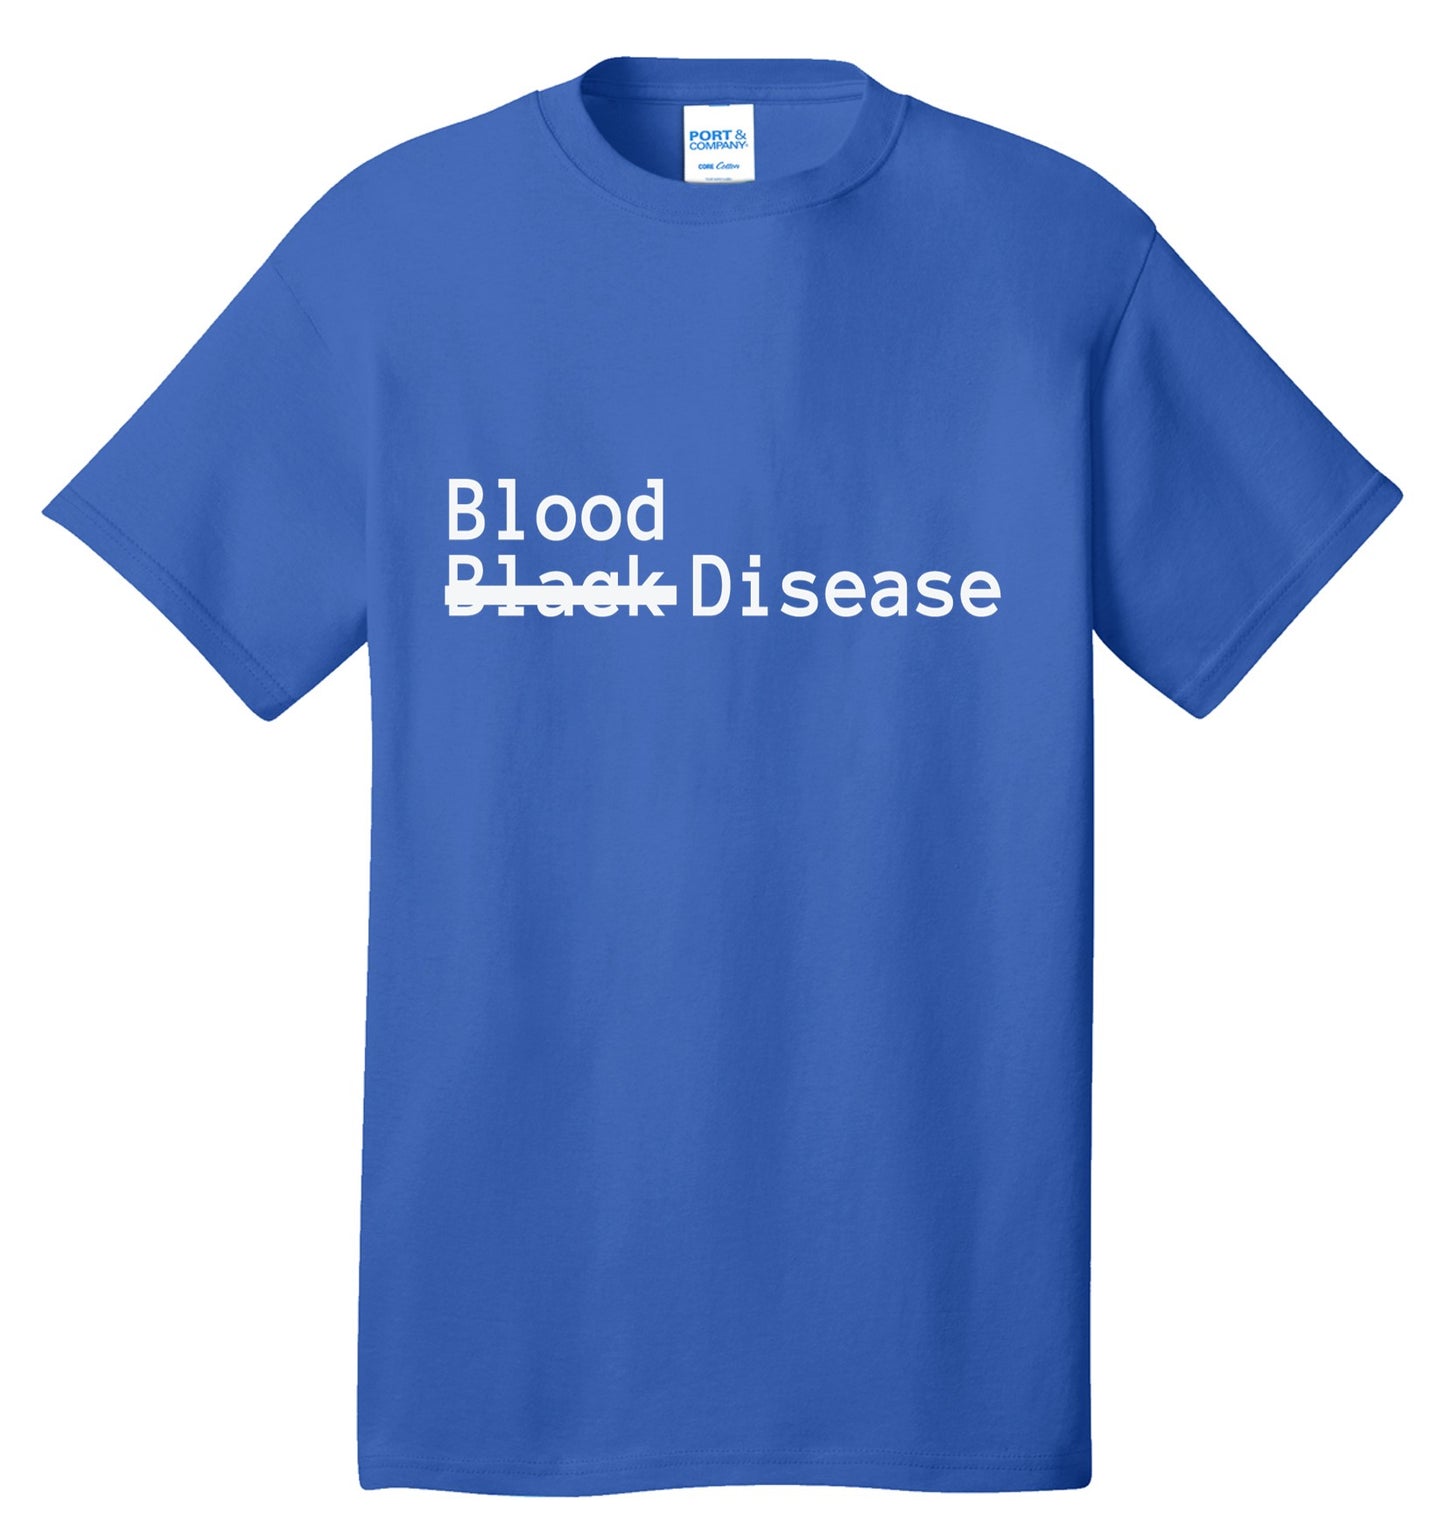 Sickle Cell is a BLOOD Condition NOT Black Condition